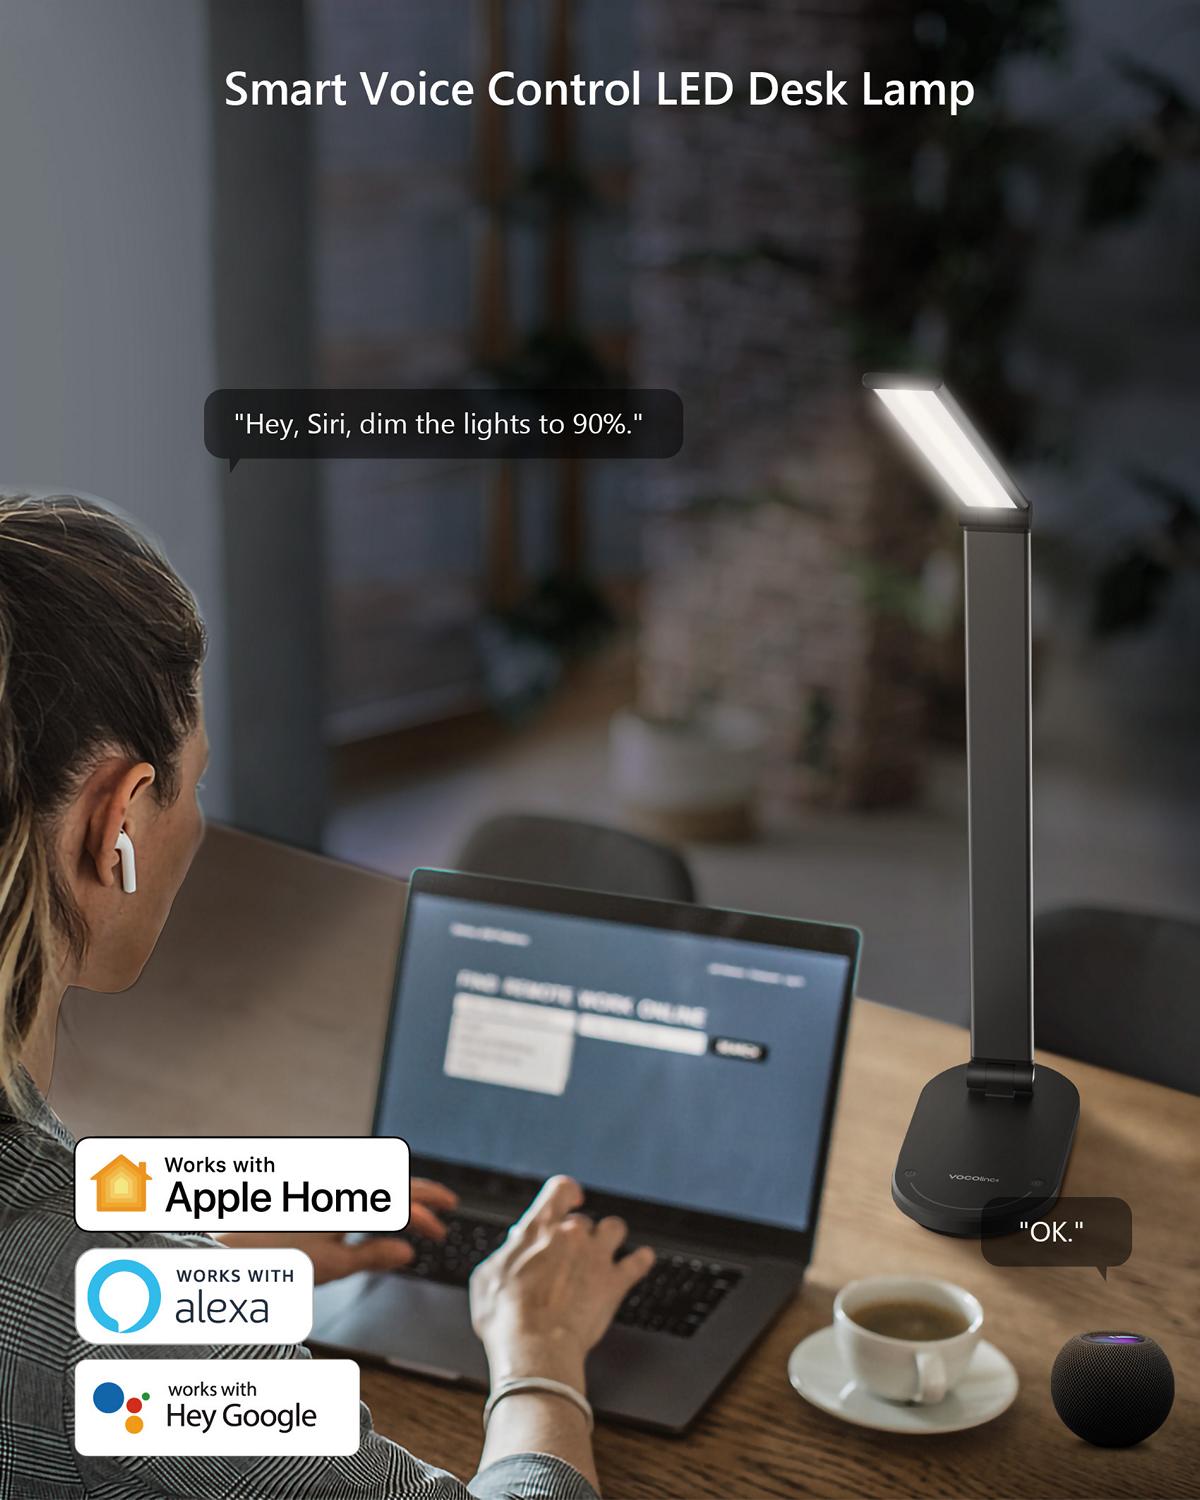 Smart Voice Control: VOCOlinc led desk lamp work with Google Assistant, Alexa, and Apple HomeKit. Just say the word to control the led table lamp via Alexa, or Google Assistant, it will turn your home into a smart and comfy one. Enjoy the hands-free conve